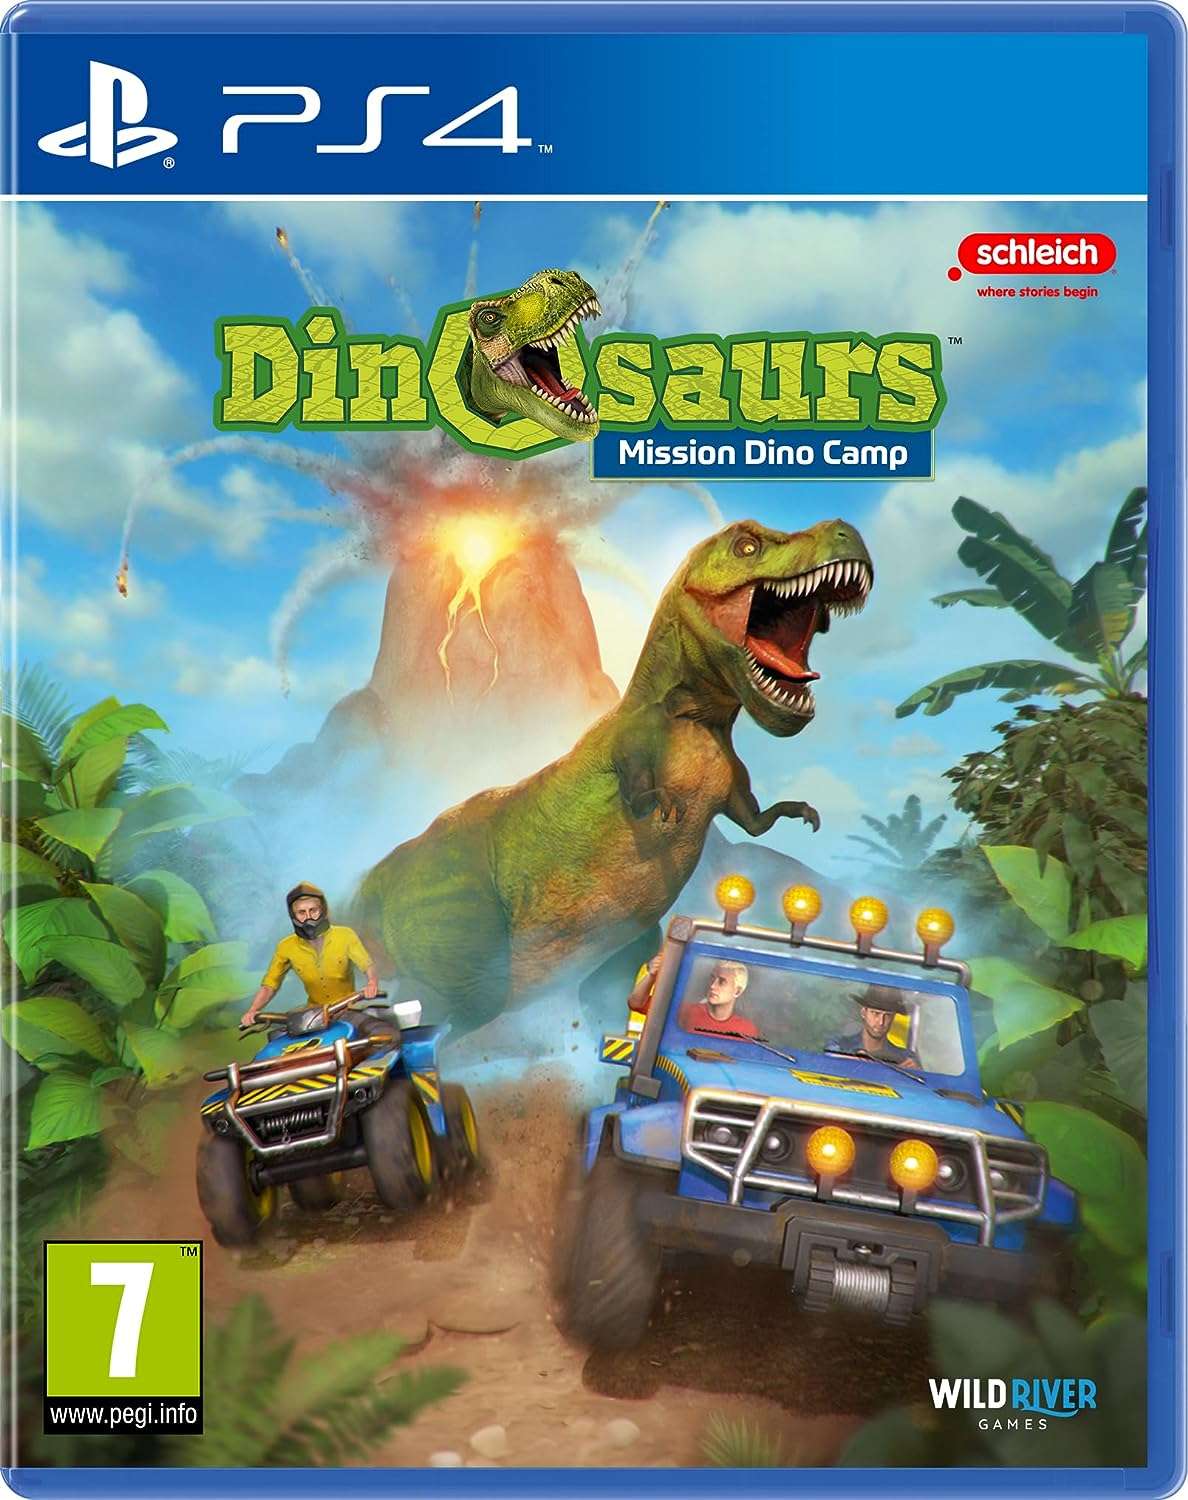 Dinosaurs Mission Dino Camp for PS4 to rent